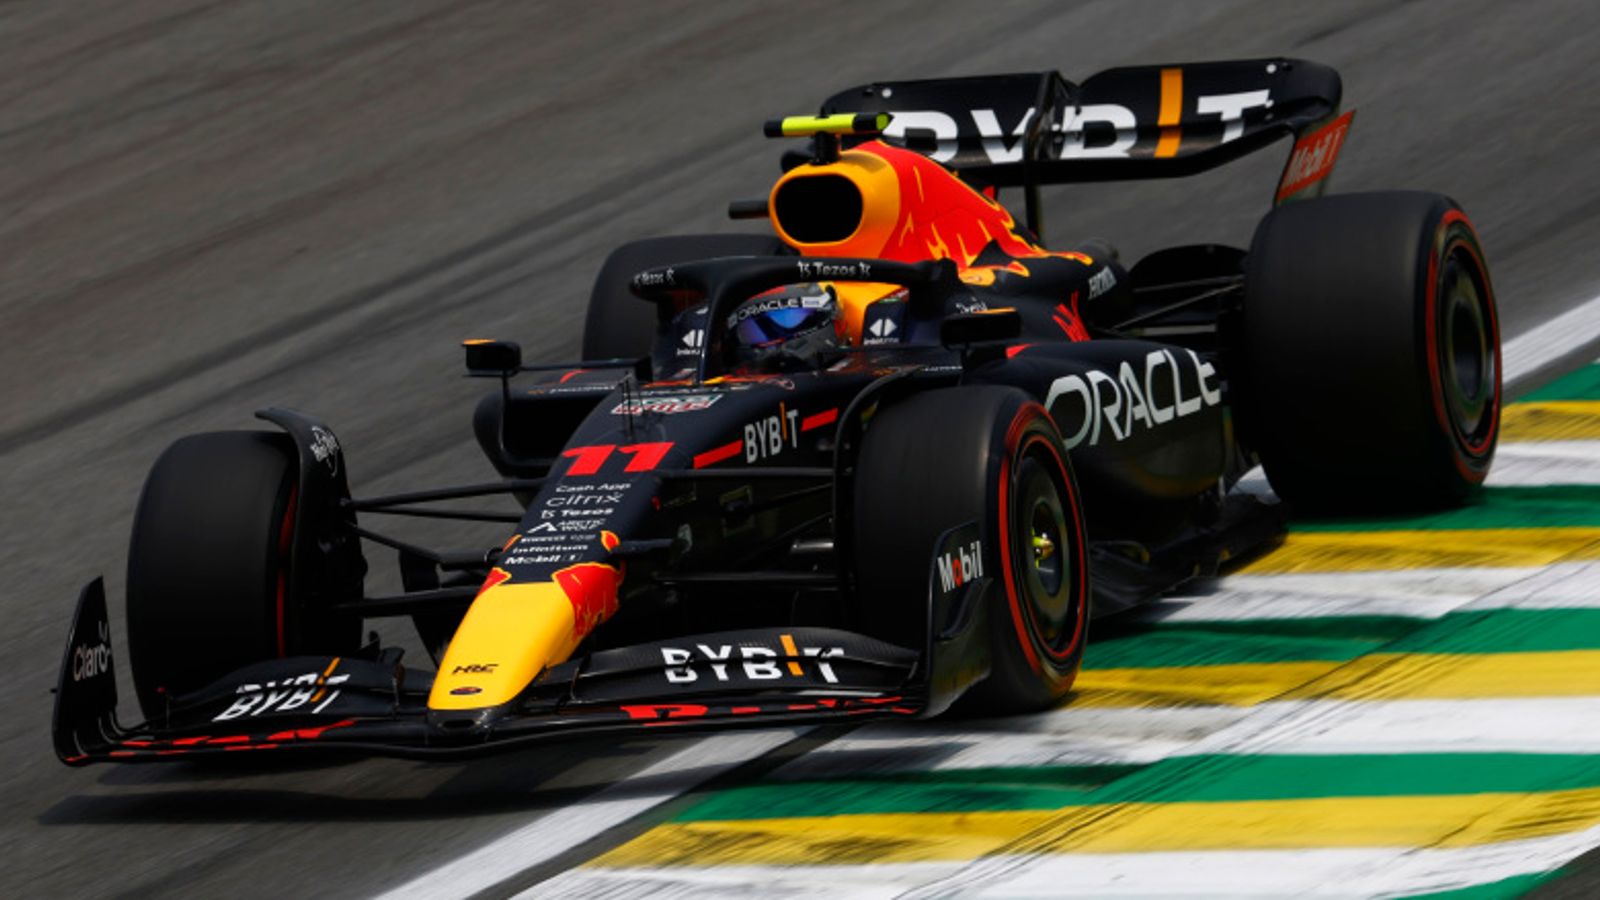 Sao Paulo GP: Sergio Perez edges Ferrari's Charles Leclerc and Red Bull team-mate Max Verstappen to top first practice